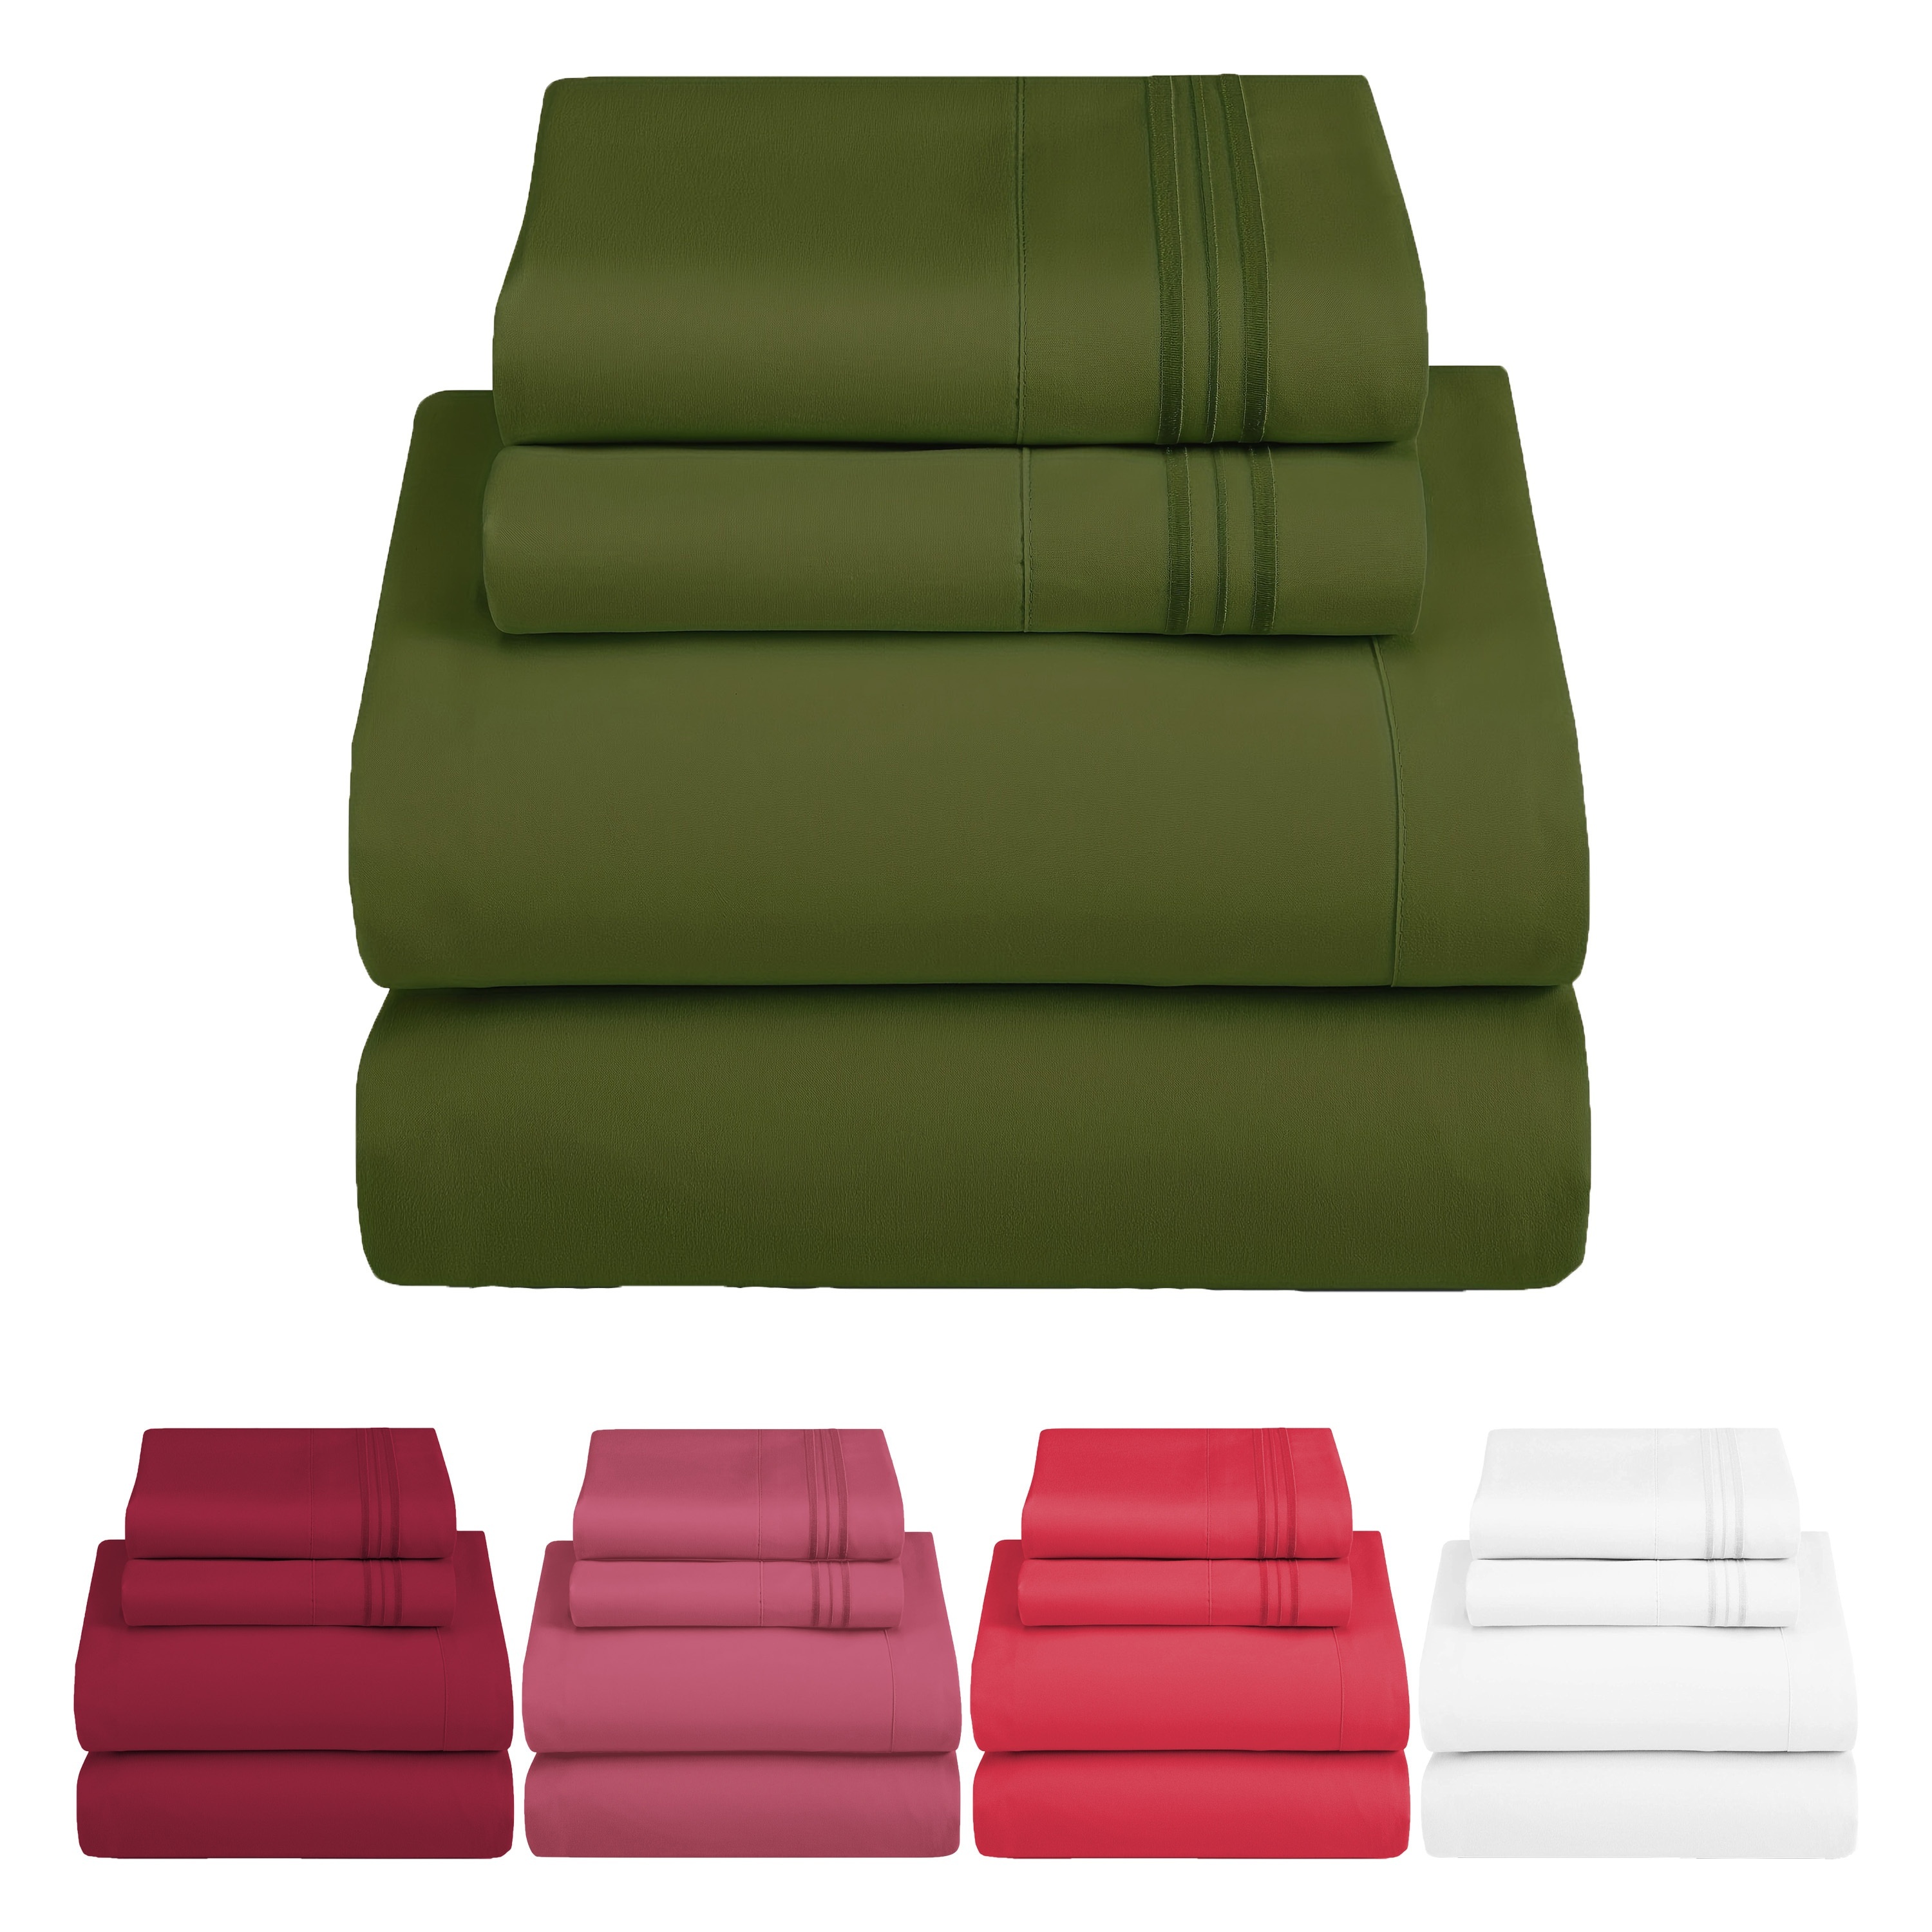 

3/4pcs Olive Green Embroidered Bed Sheet Kit (1 Flat Sheet + 1 Fitted Sheet + 1/2 Pillowcase)without Core